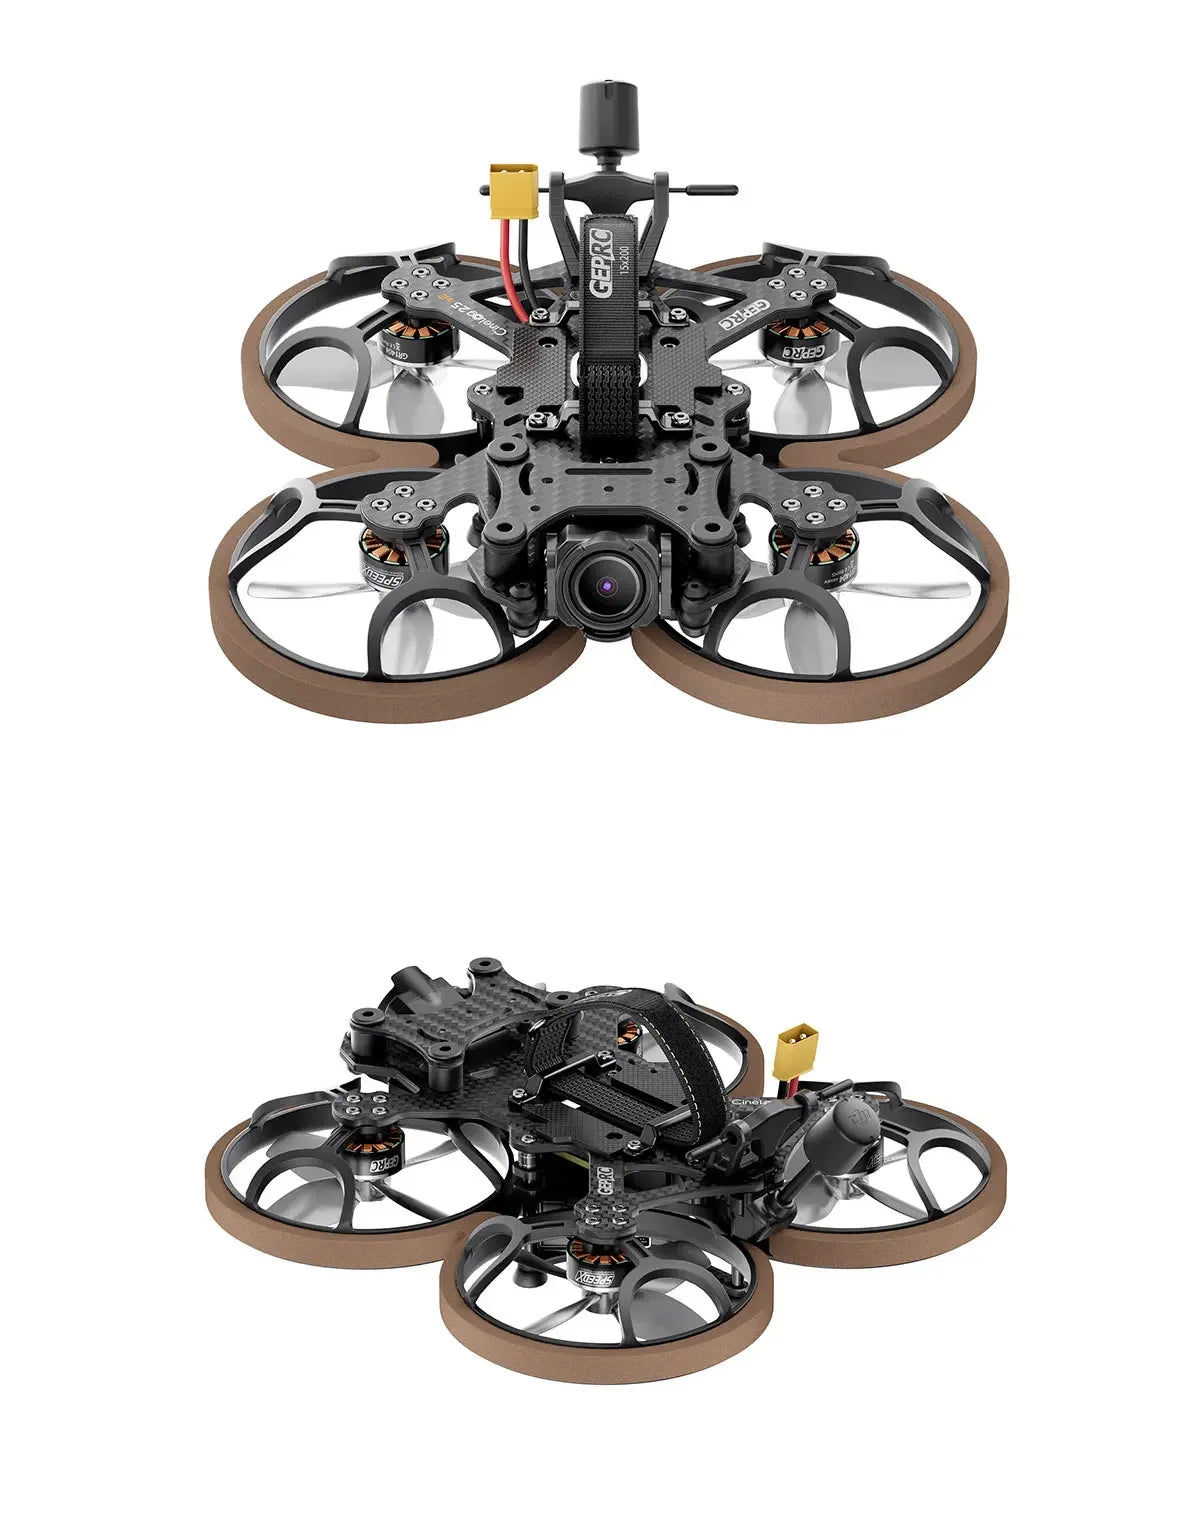 GEPRC Cinelog25 V2 HD Wasp FPV, Cinelog25 V2 HD Wasp Quadcopter is a lightweight and compact quadc